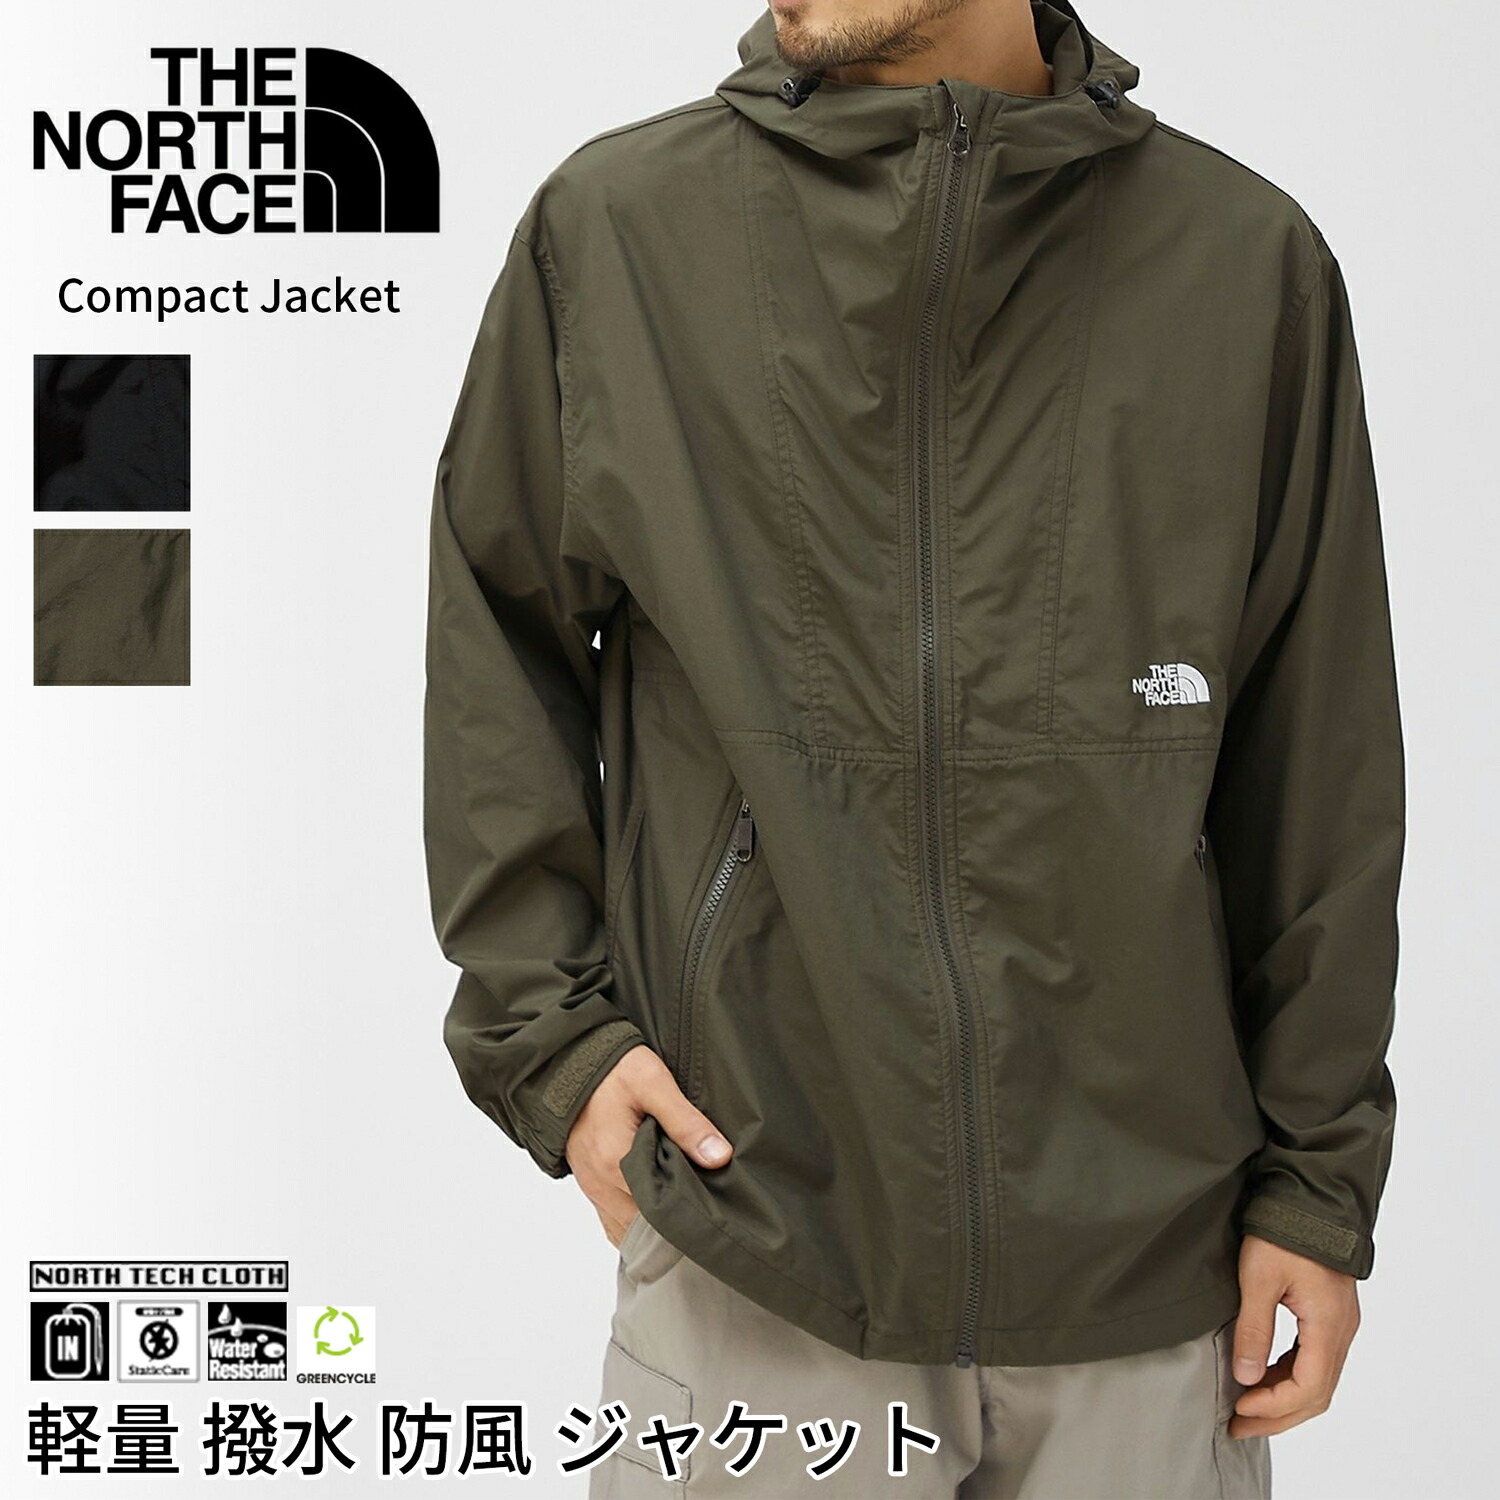 THE NORTH FACE] Compact Jacket / The North Face Men's Outdoor 